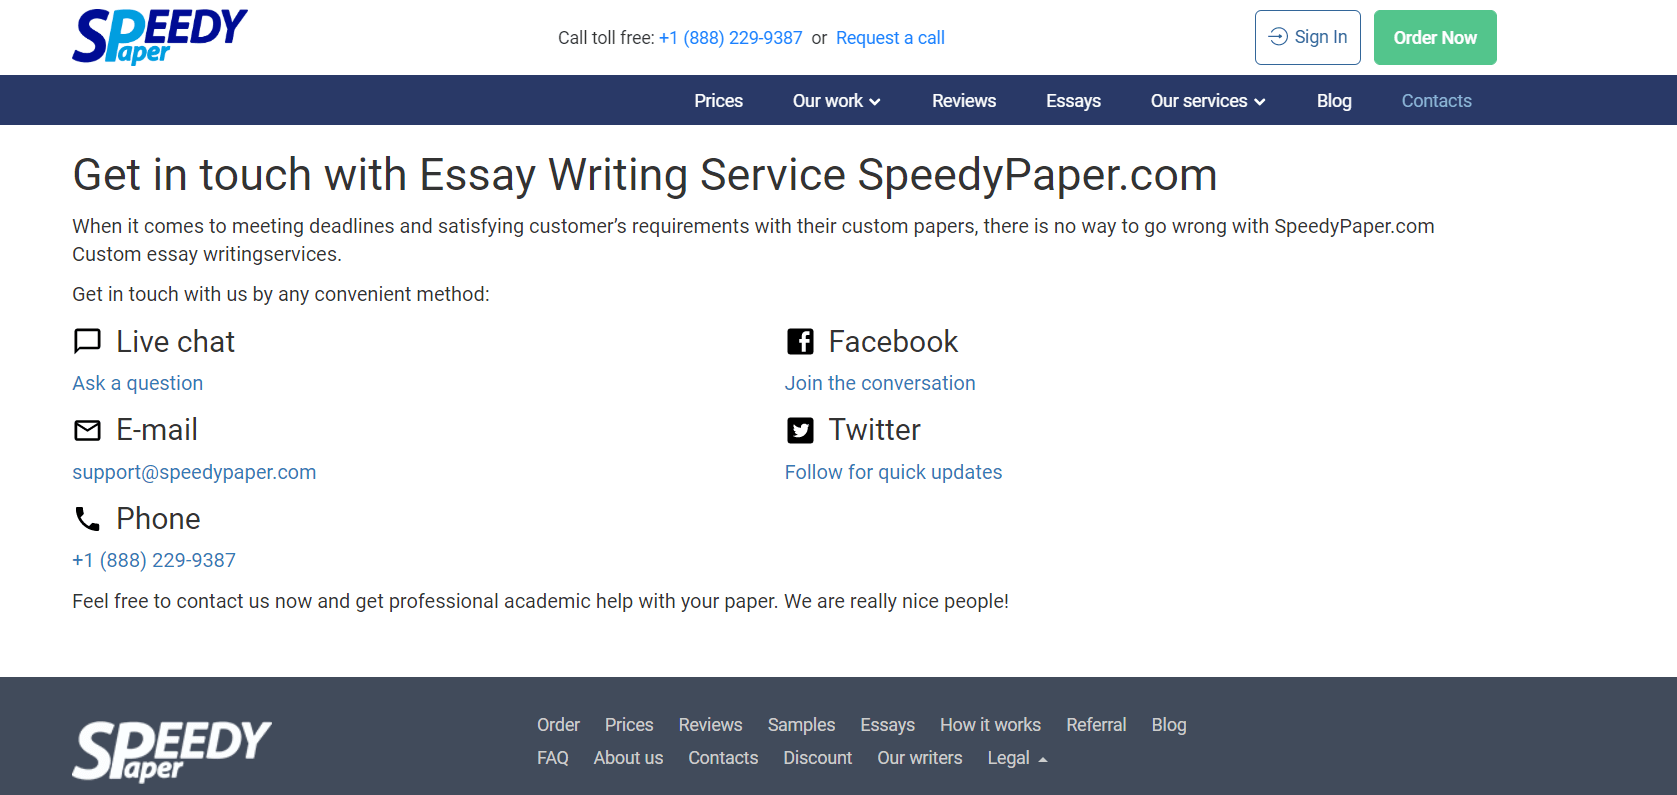 SpeedyPaper Customer Support Review